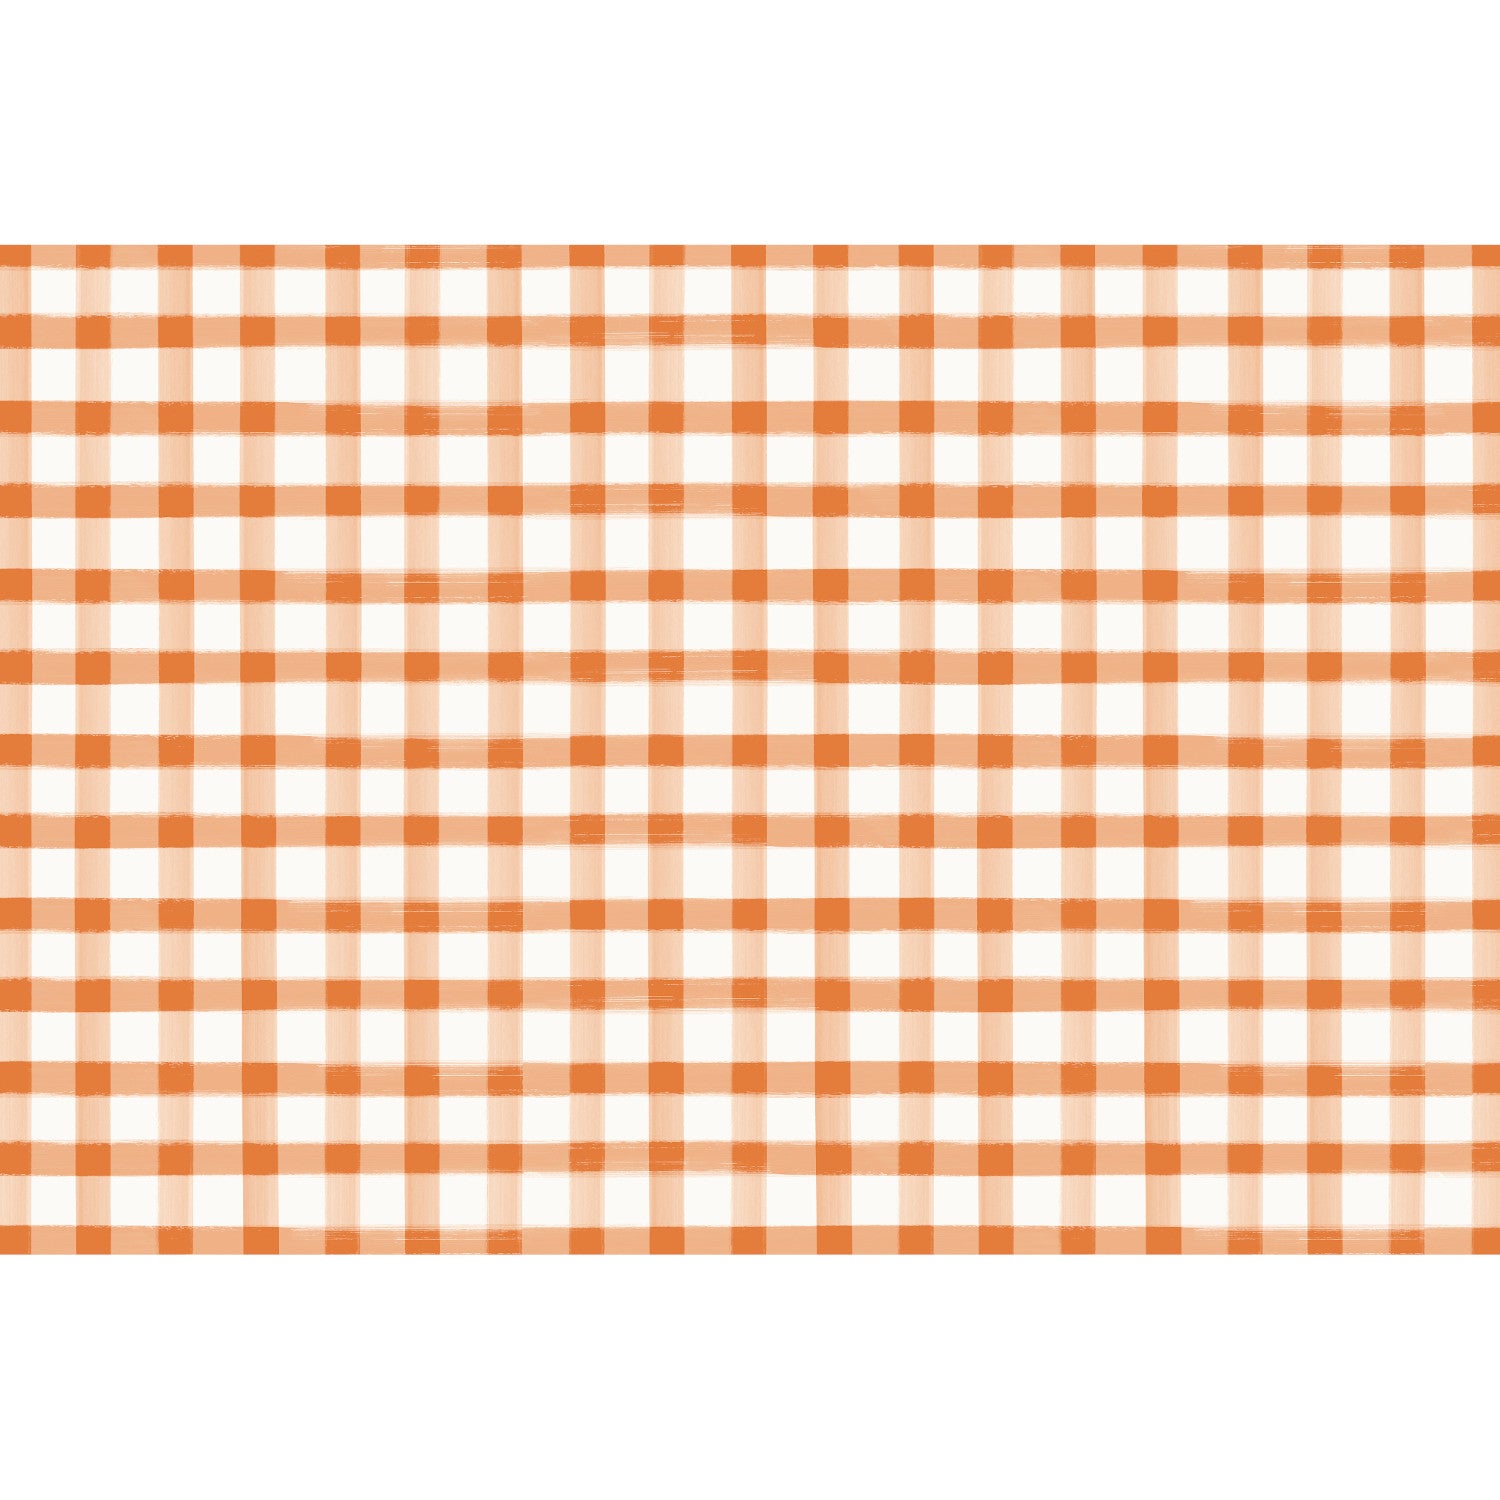 A painted gingham grid check pattern made of light orange lines intersecting at deep orange squares, on a white background.